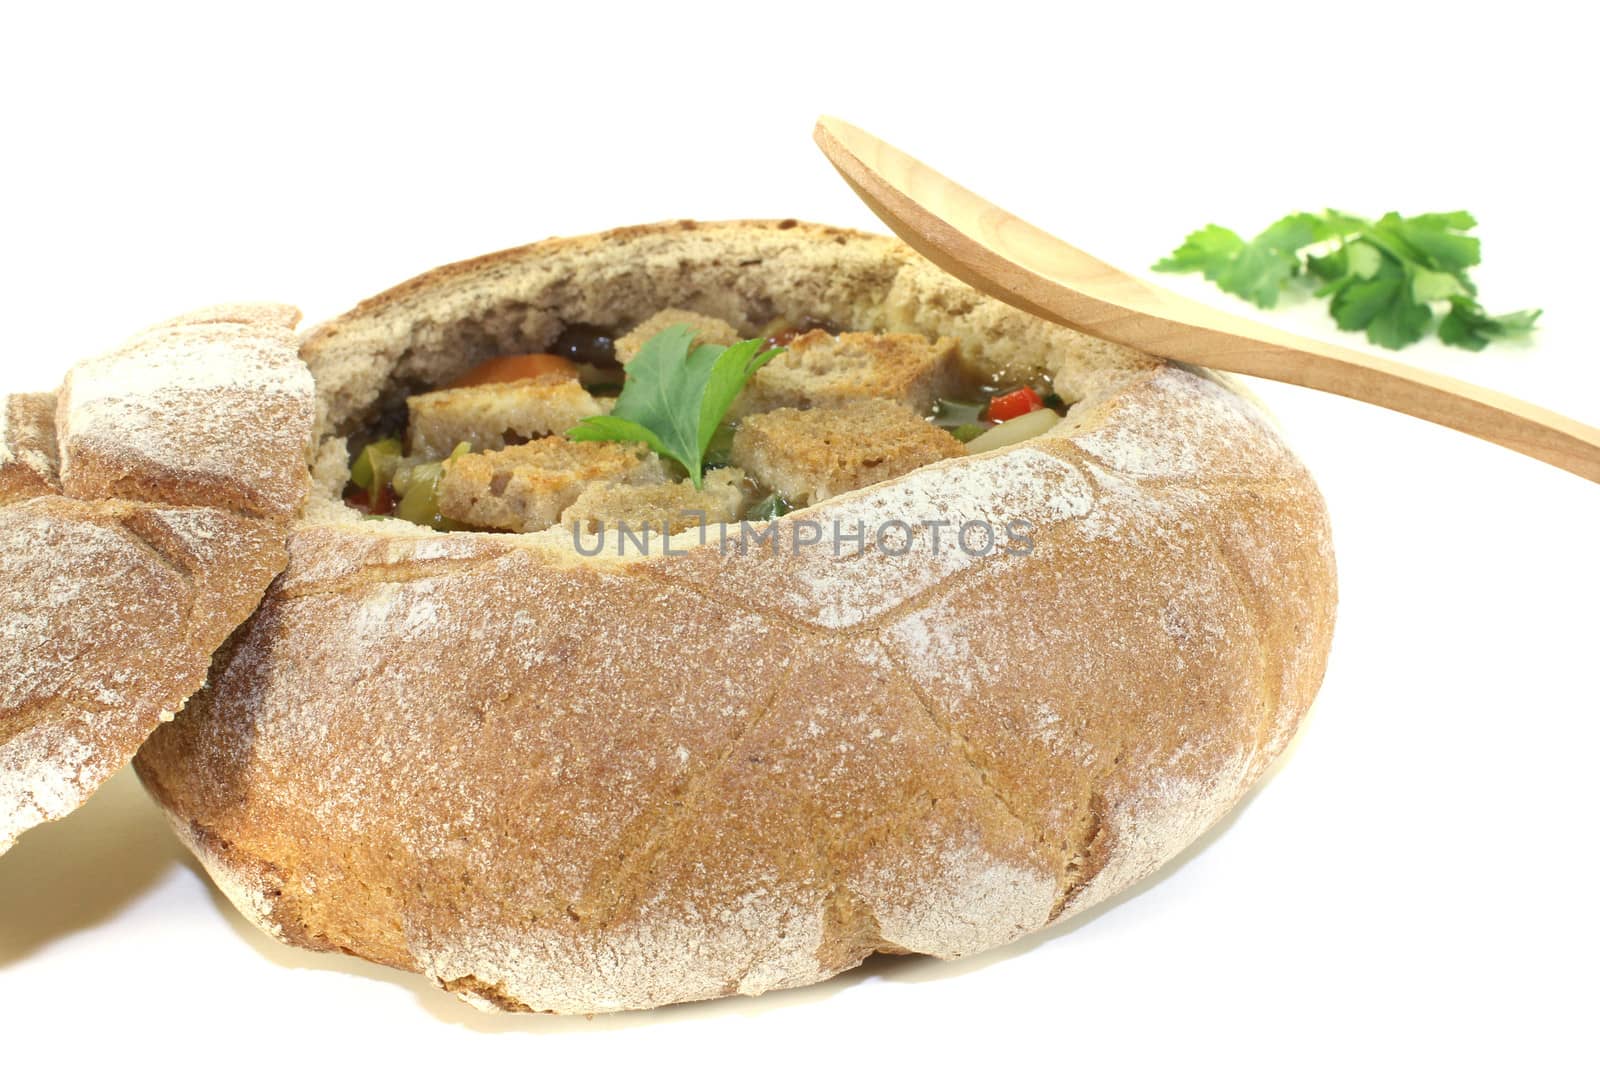 Bread soup with greens on a light background